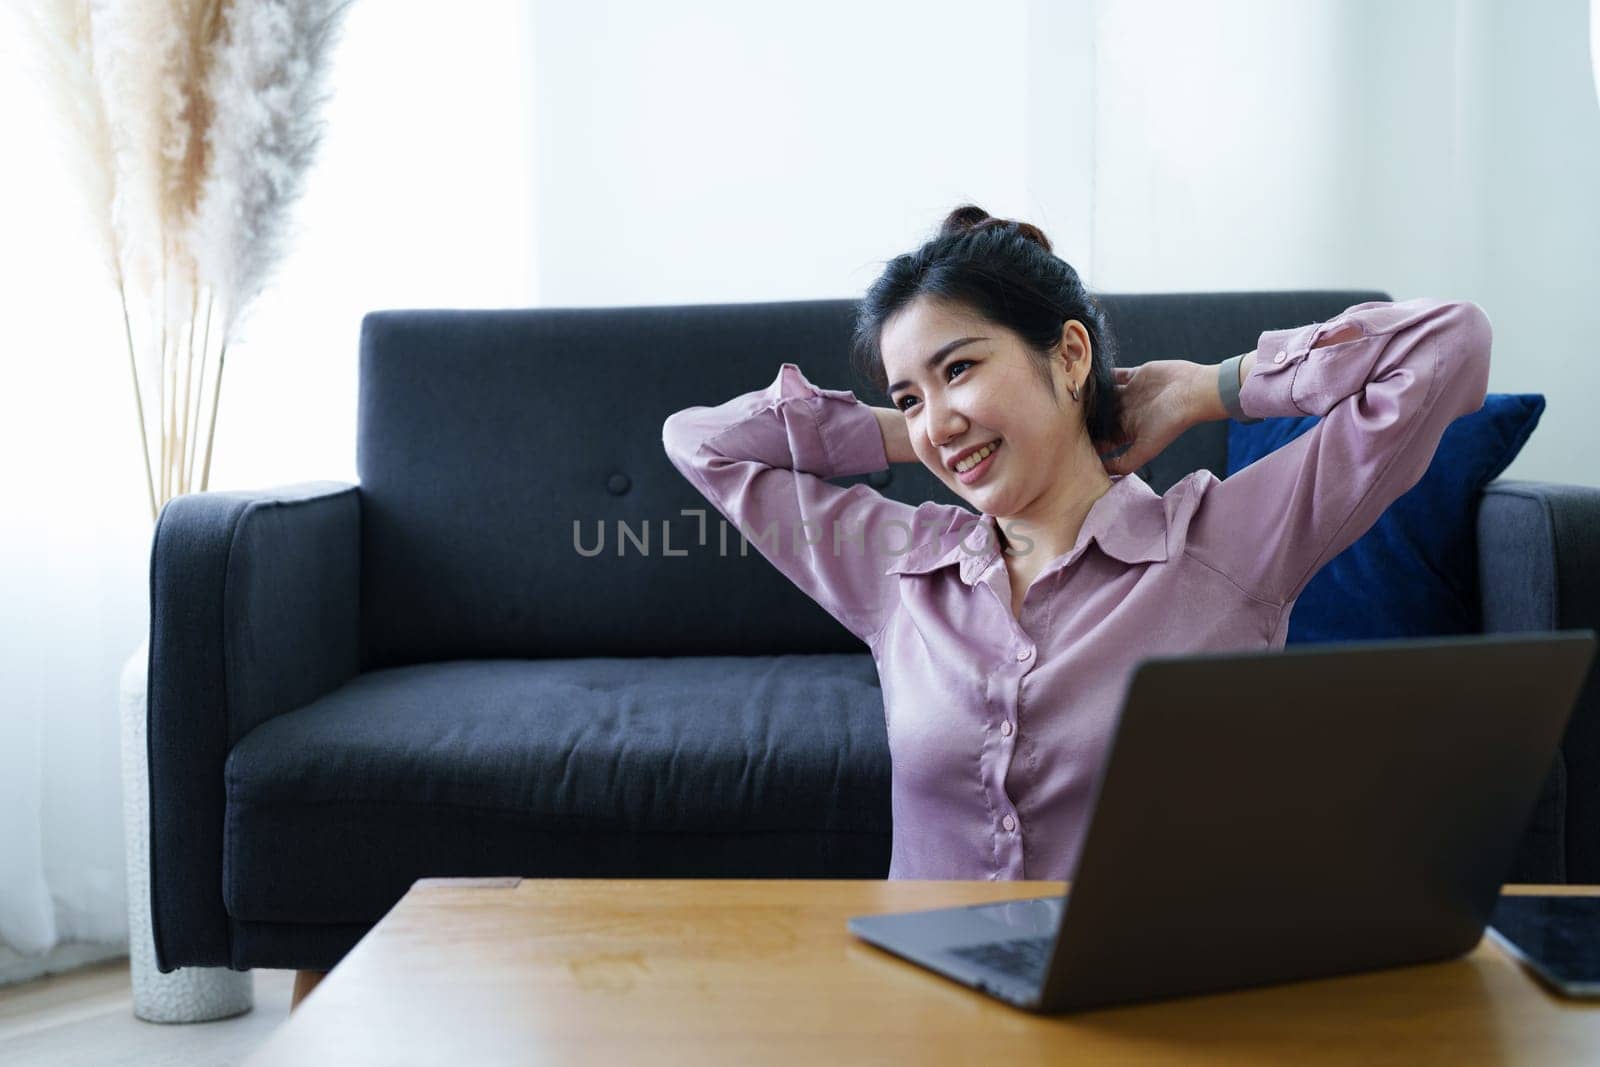 Portrait of a self-employed Asian woman using a computer at home.